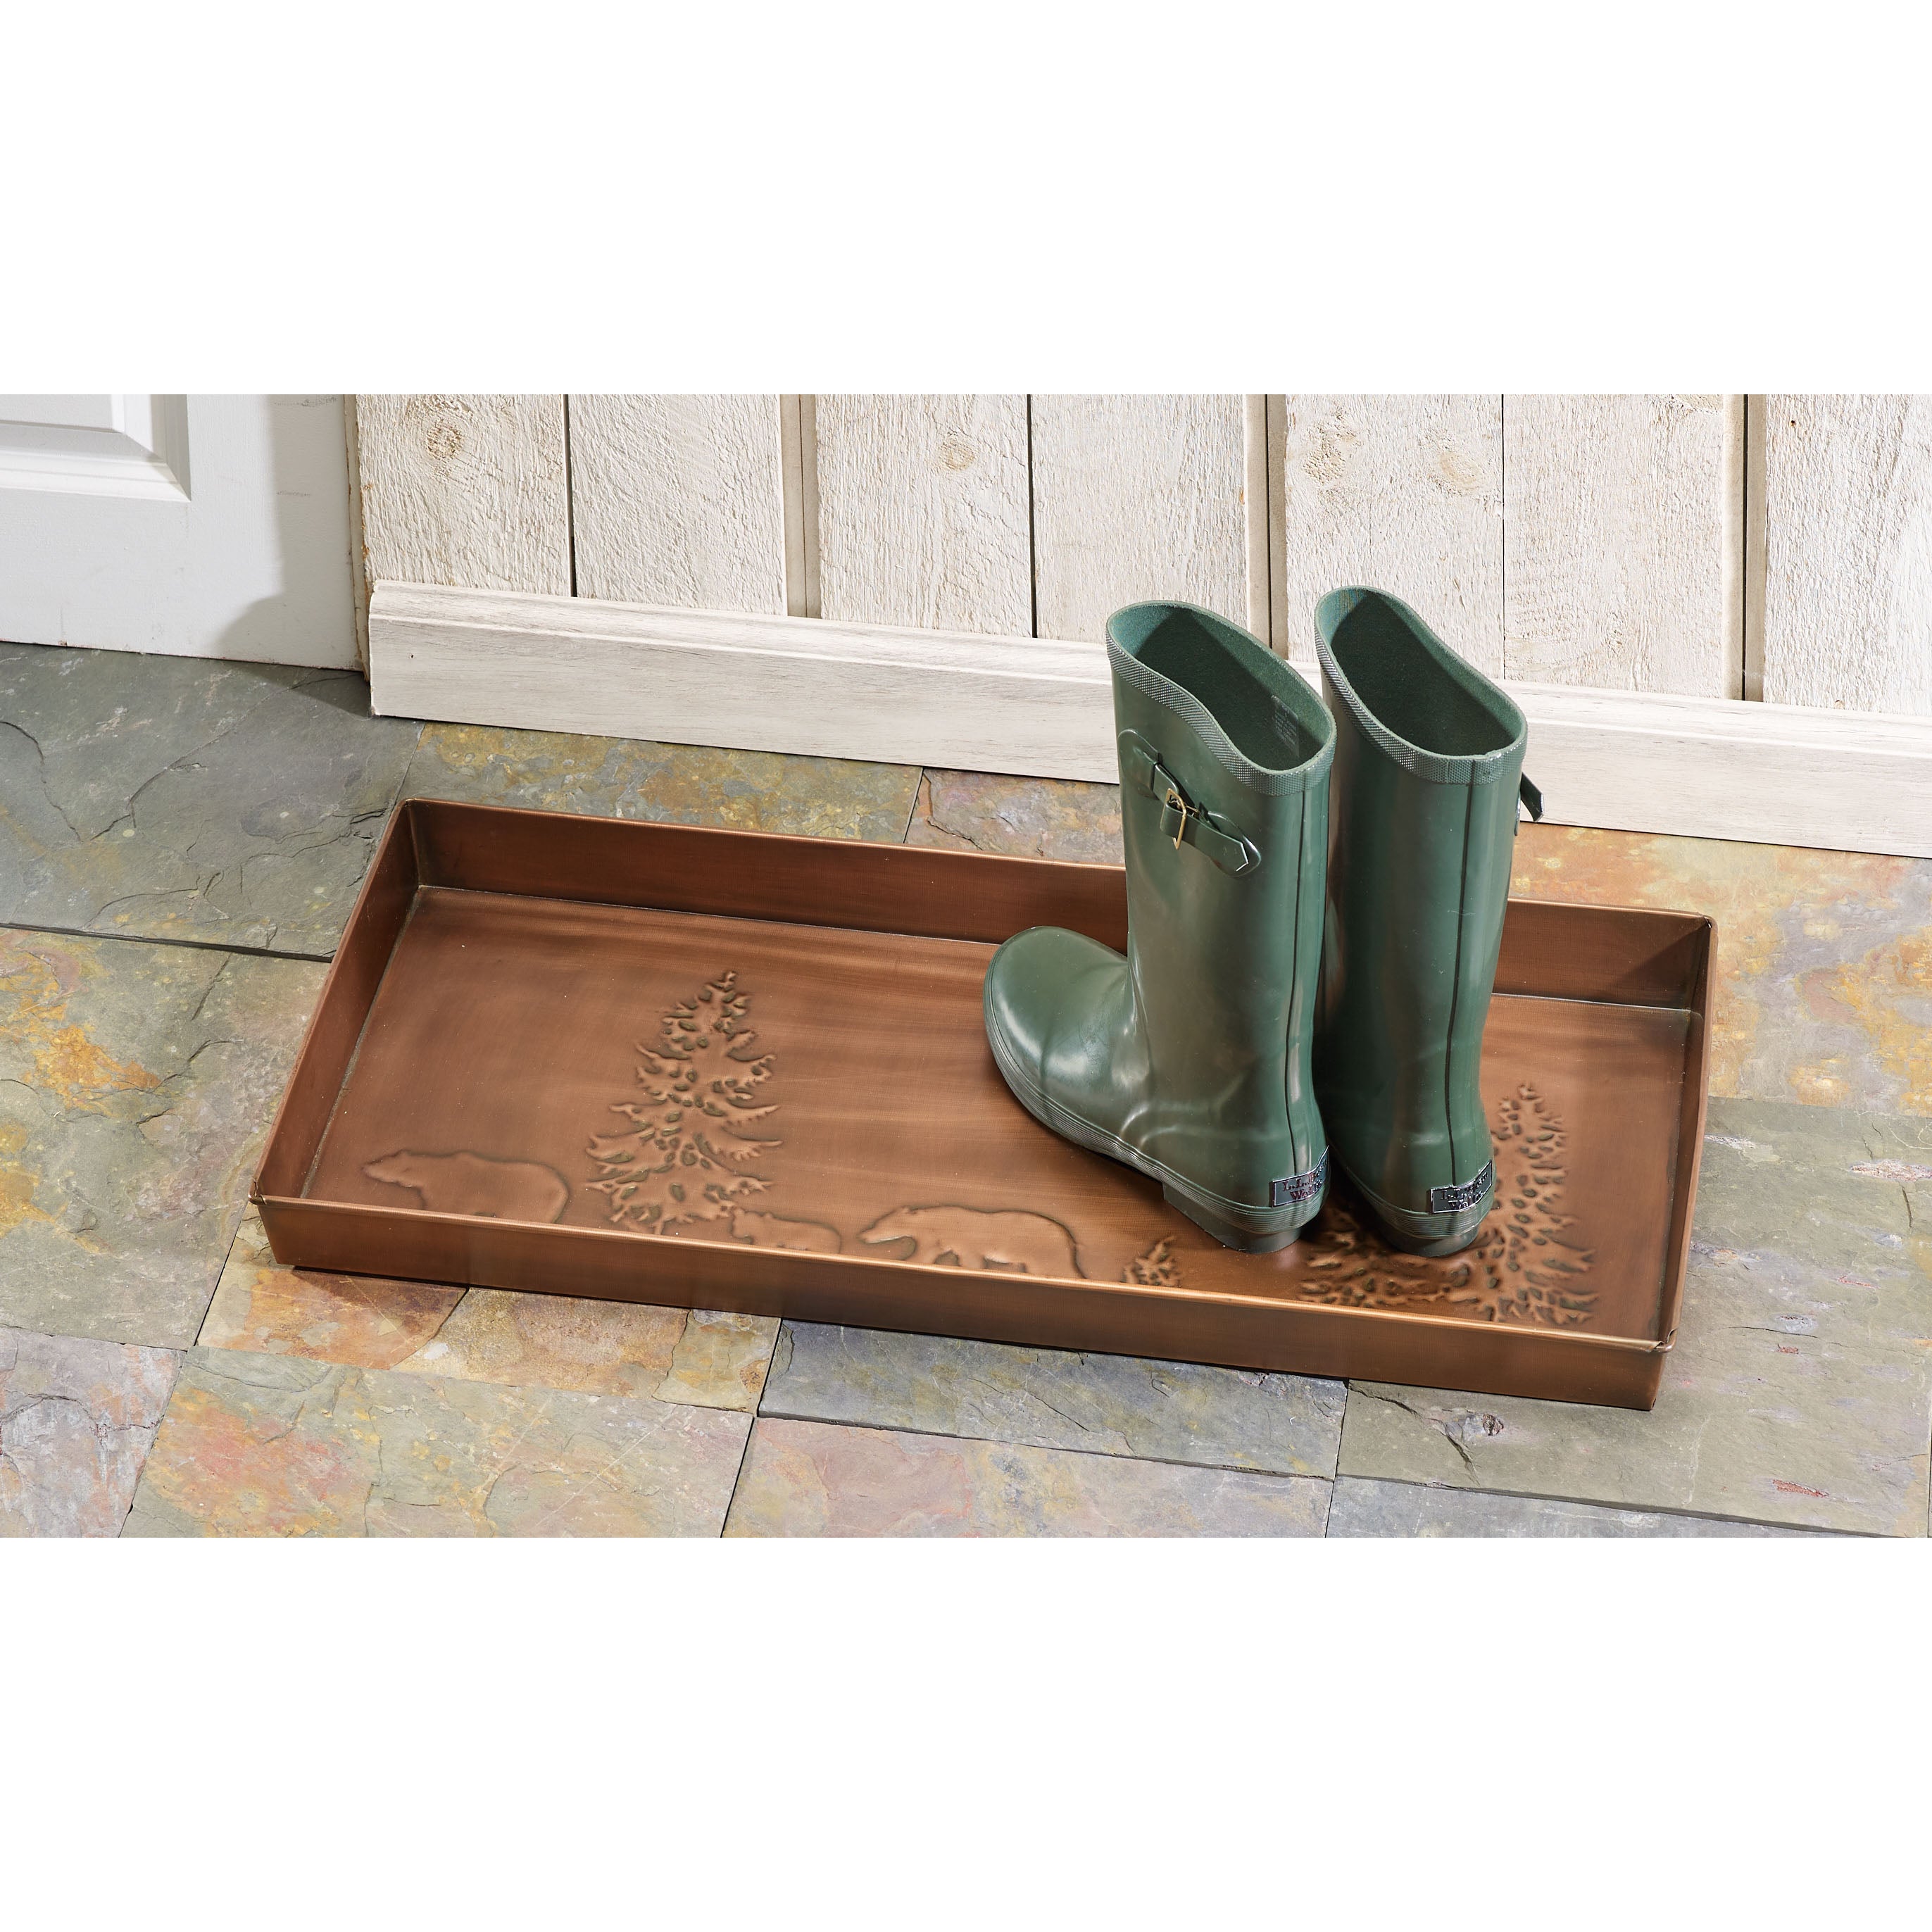 Bear Antique Copper Boot Tray